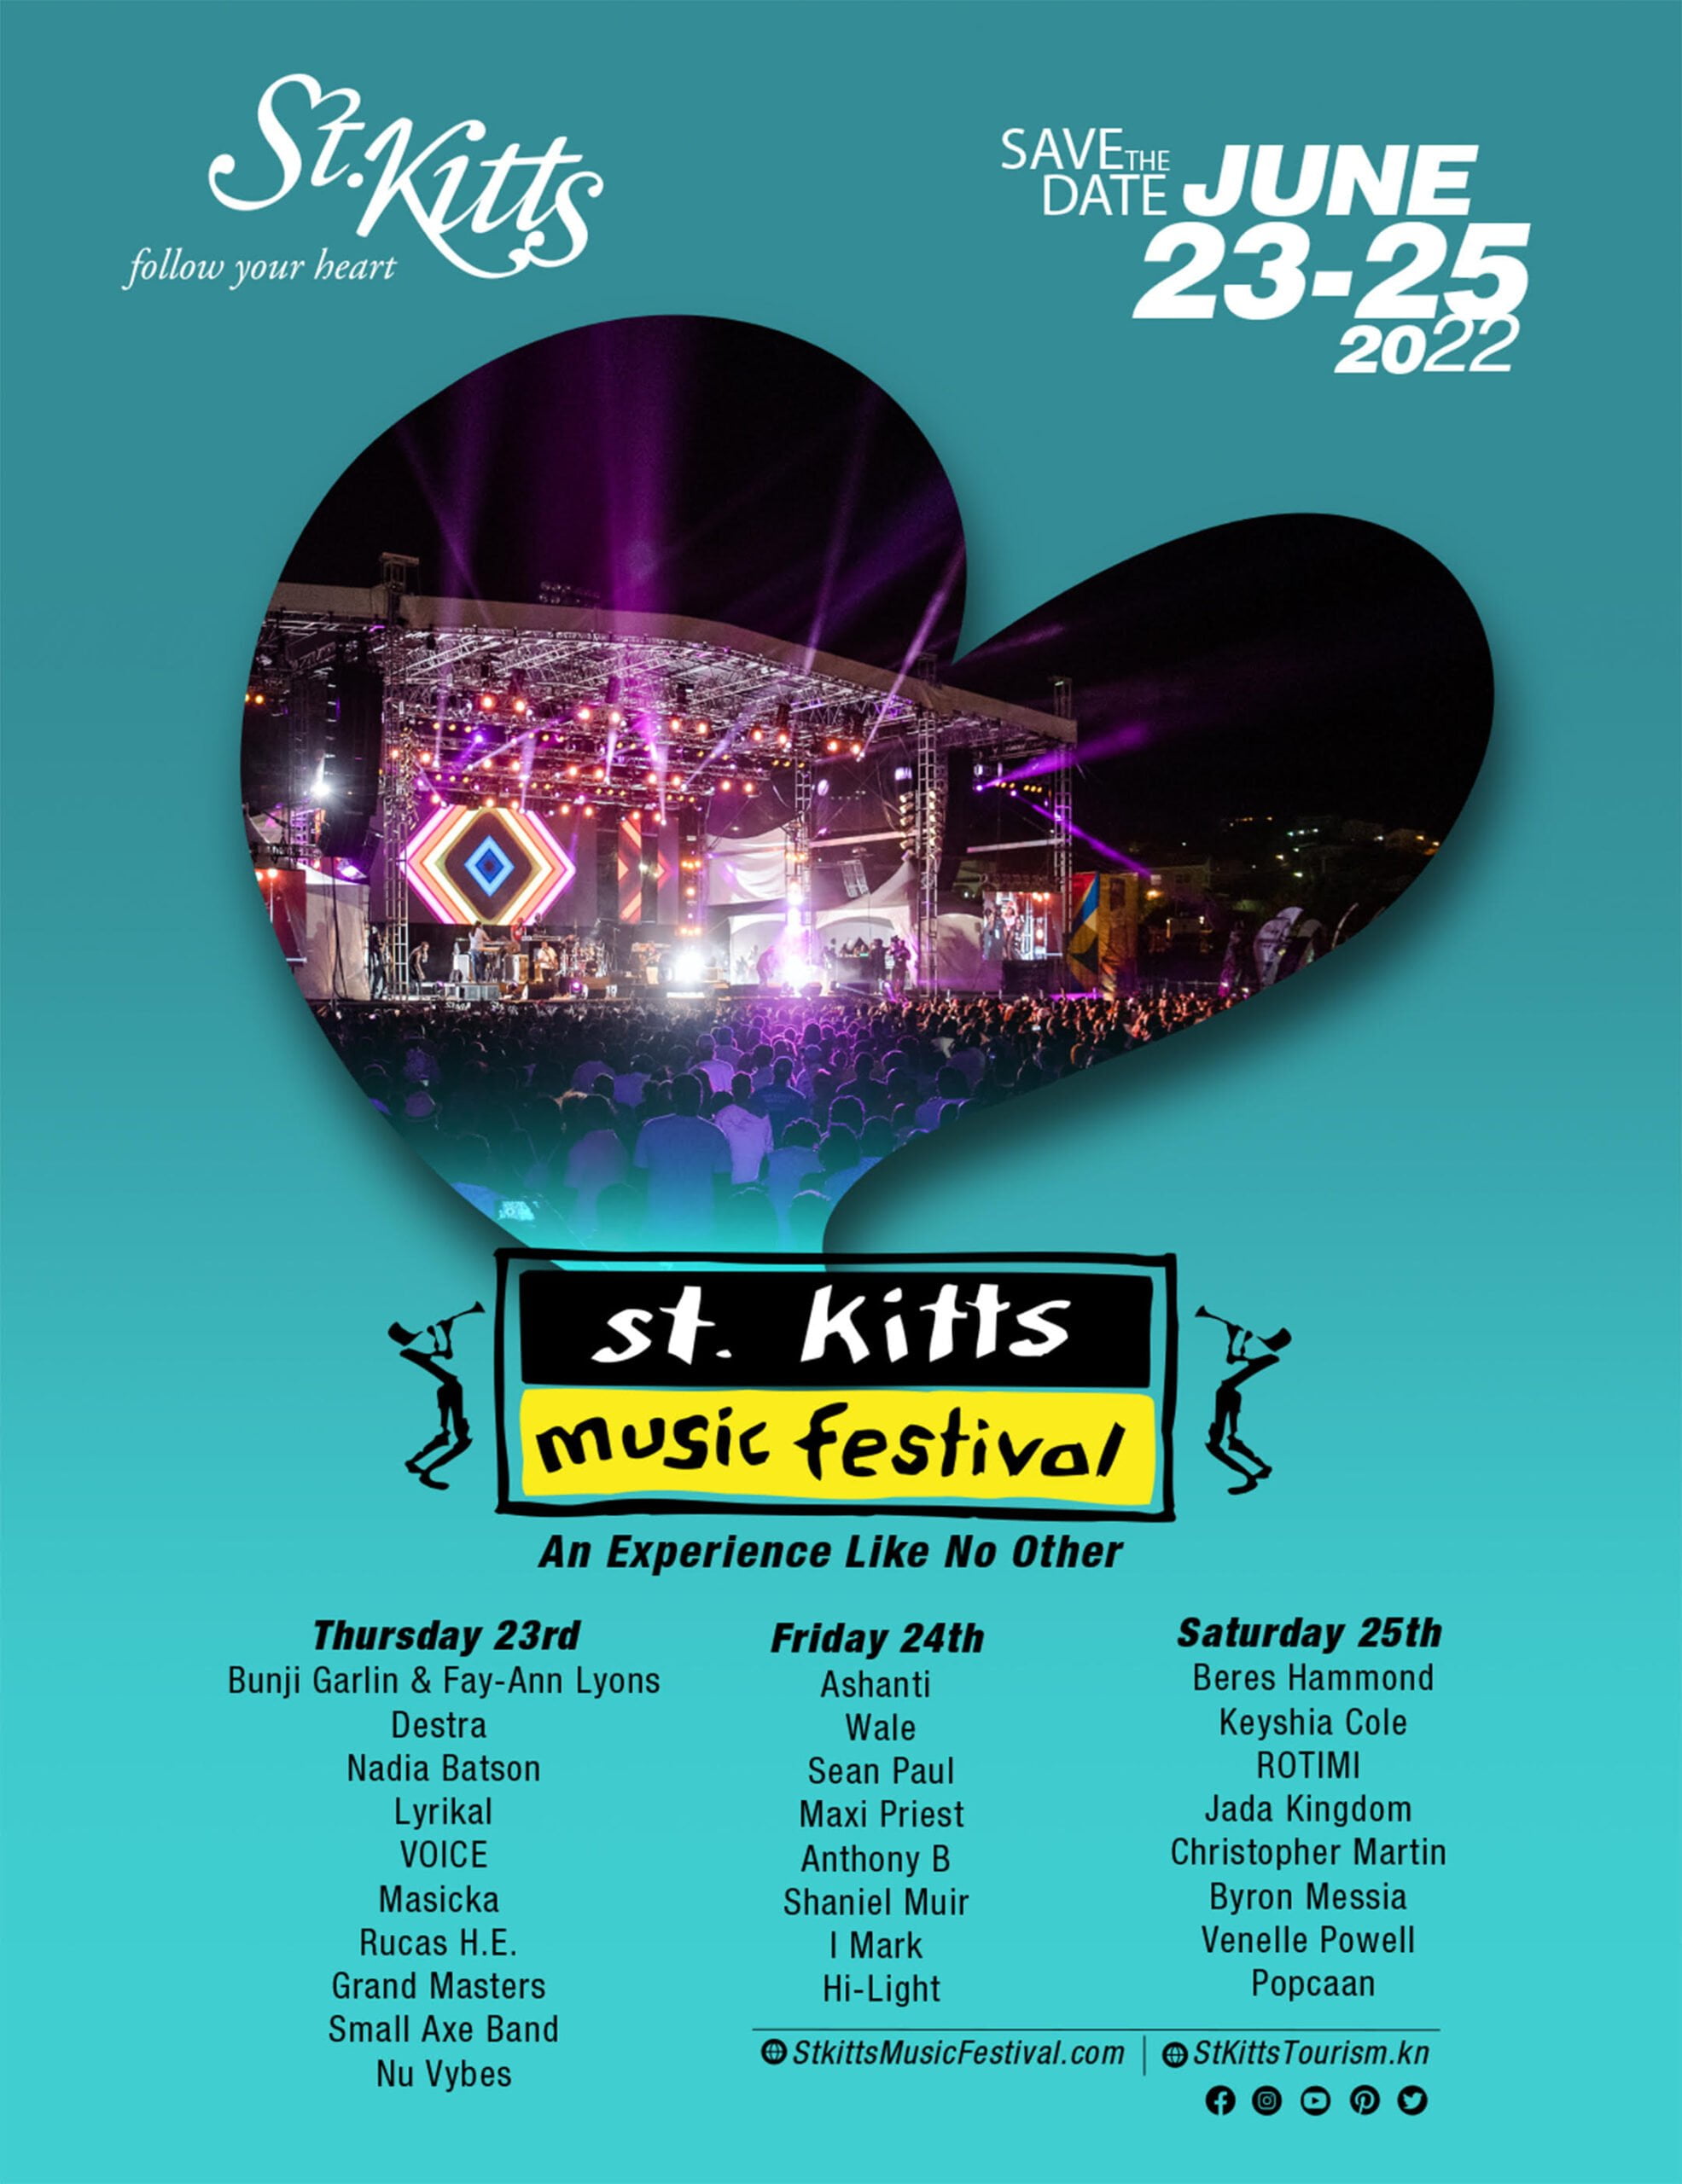 St. Kitts Music Festival announces 25th anniversary lineup The GATE